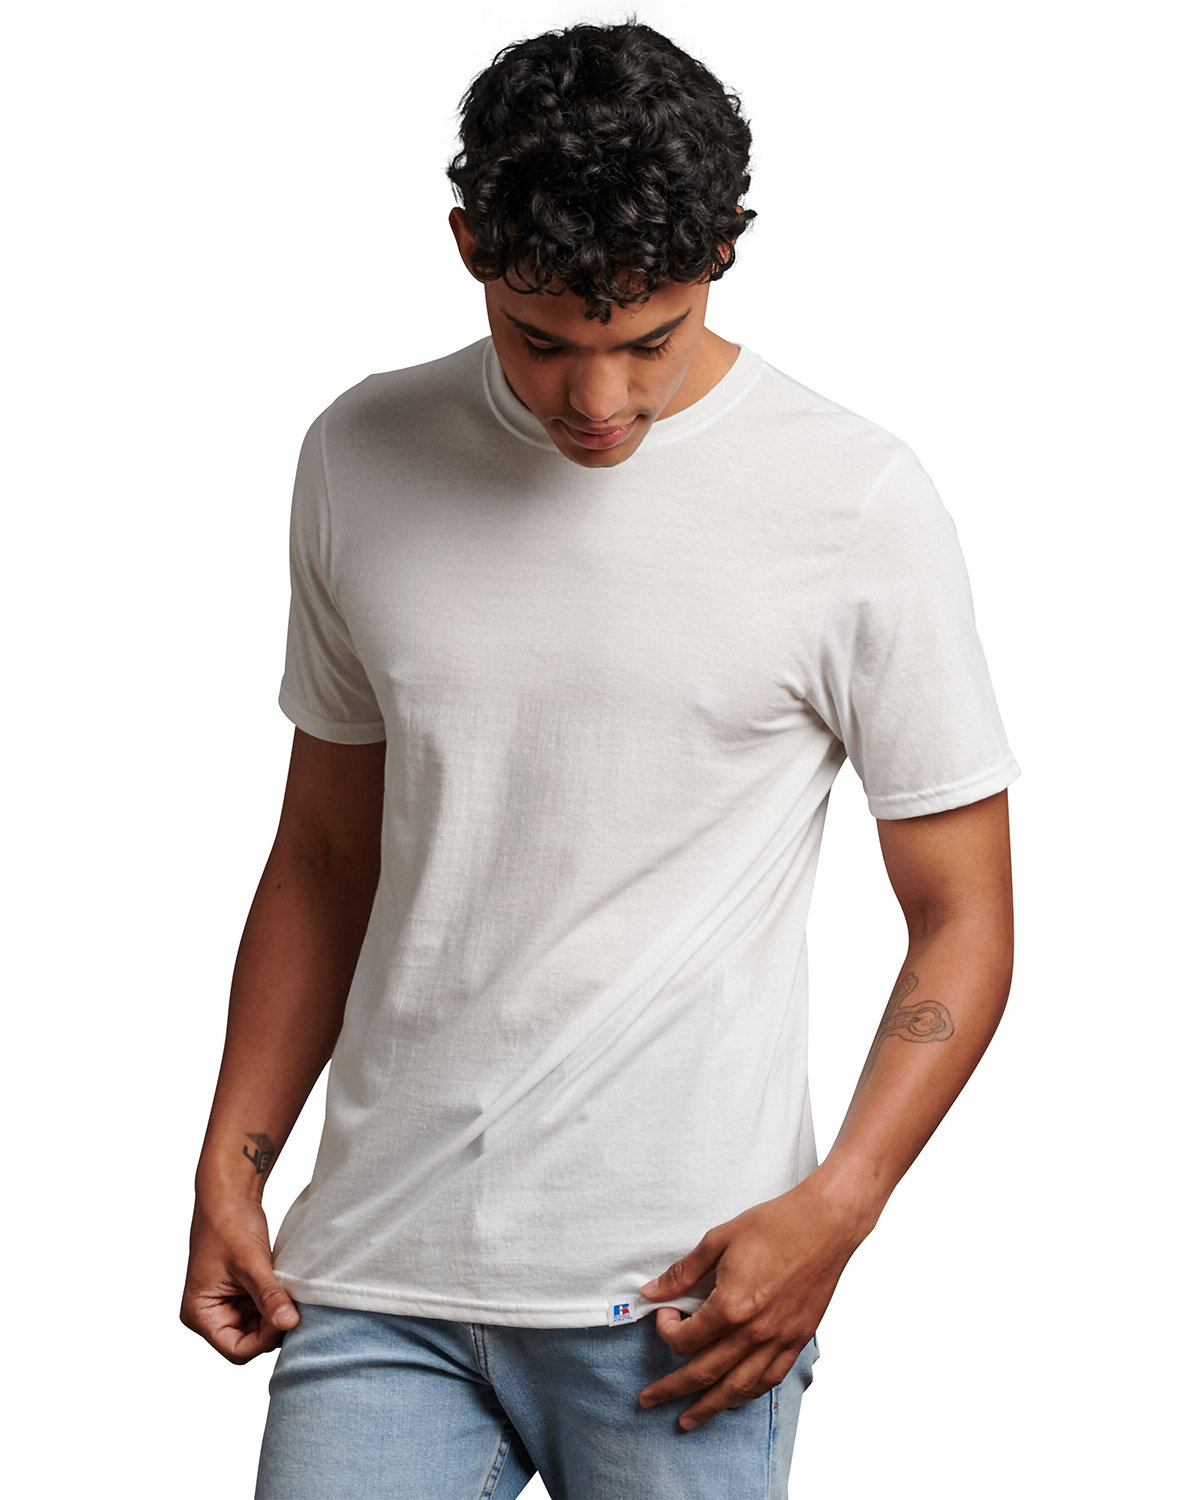 Russell Athletic Unisex Essential Performance T-Shirt WHITE 